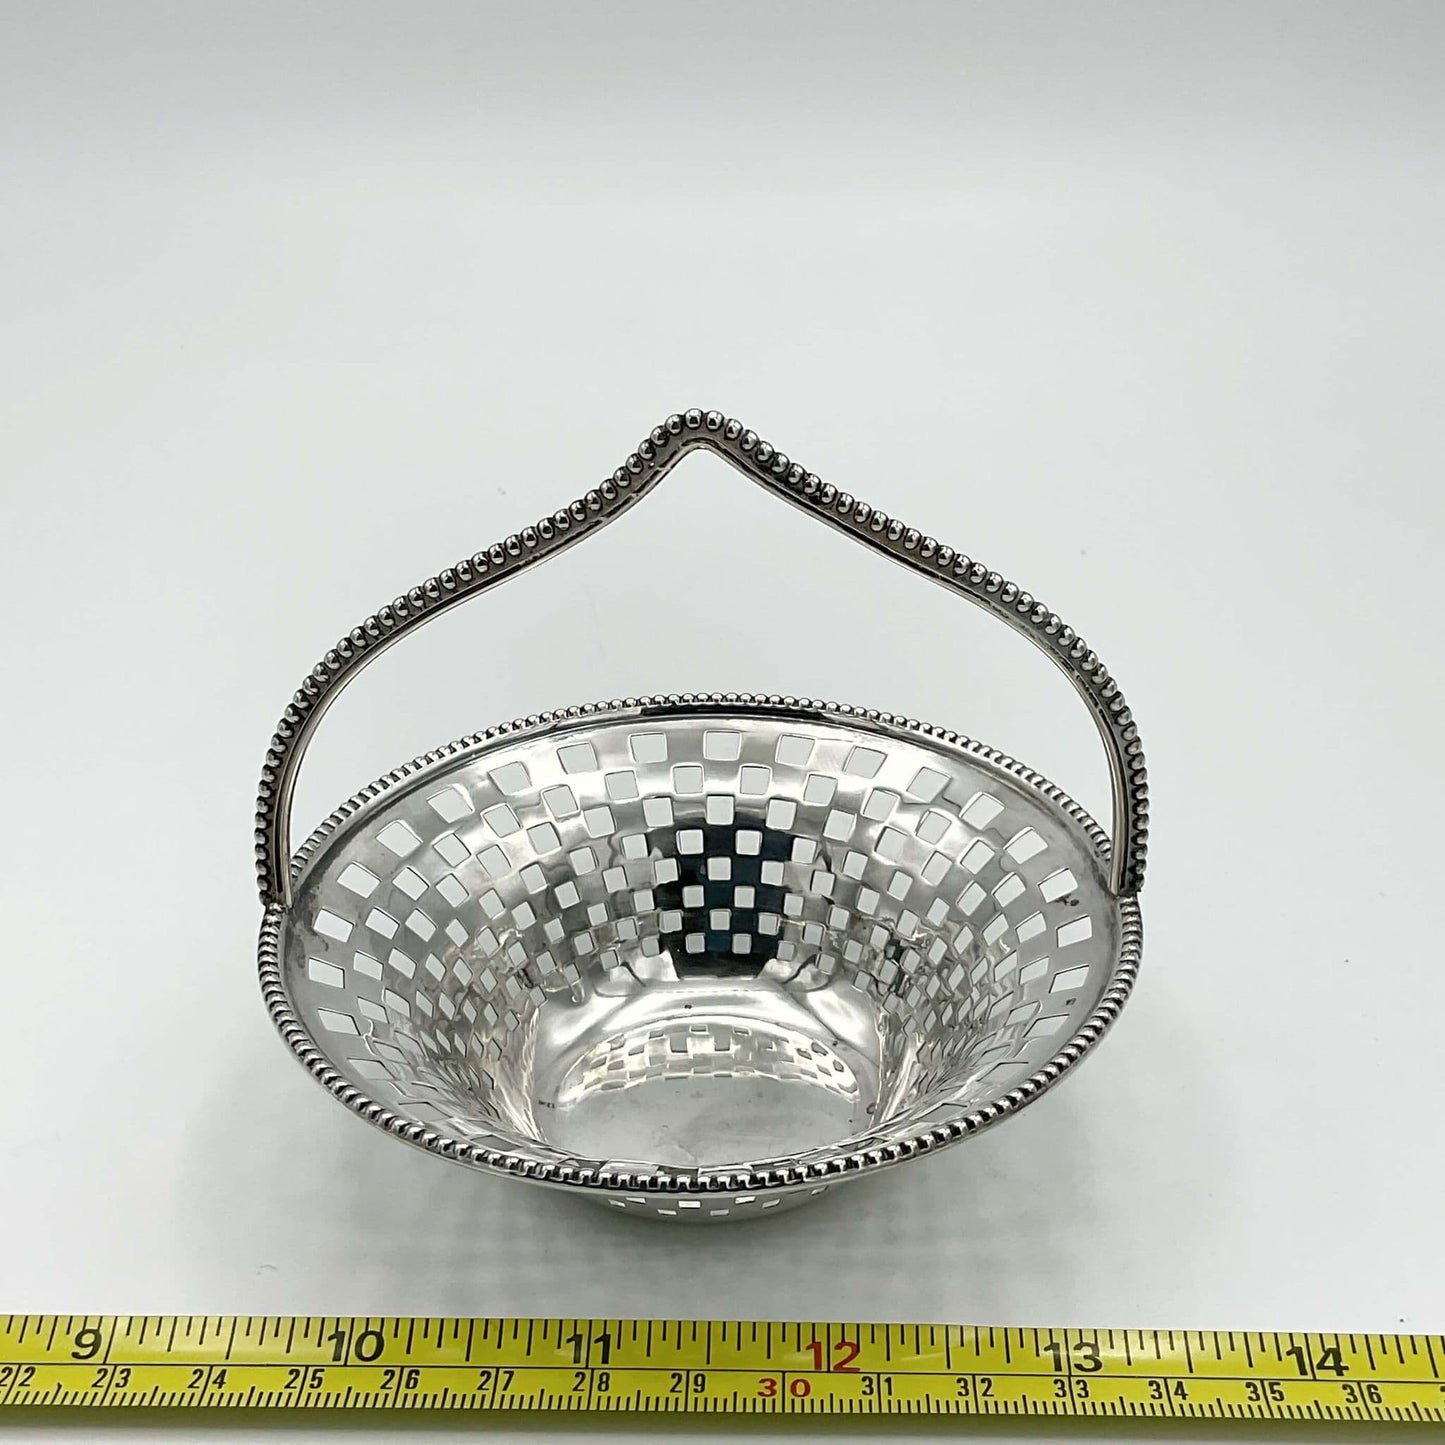 Antique Silver Basket with handle on white background next to a tape measure showing it’s 10cm in width 